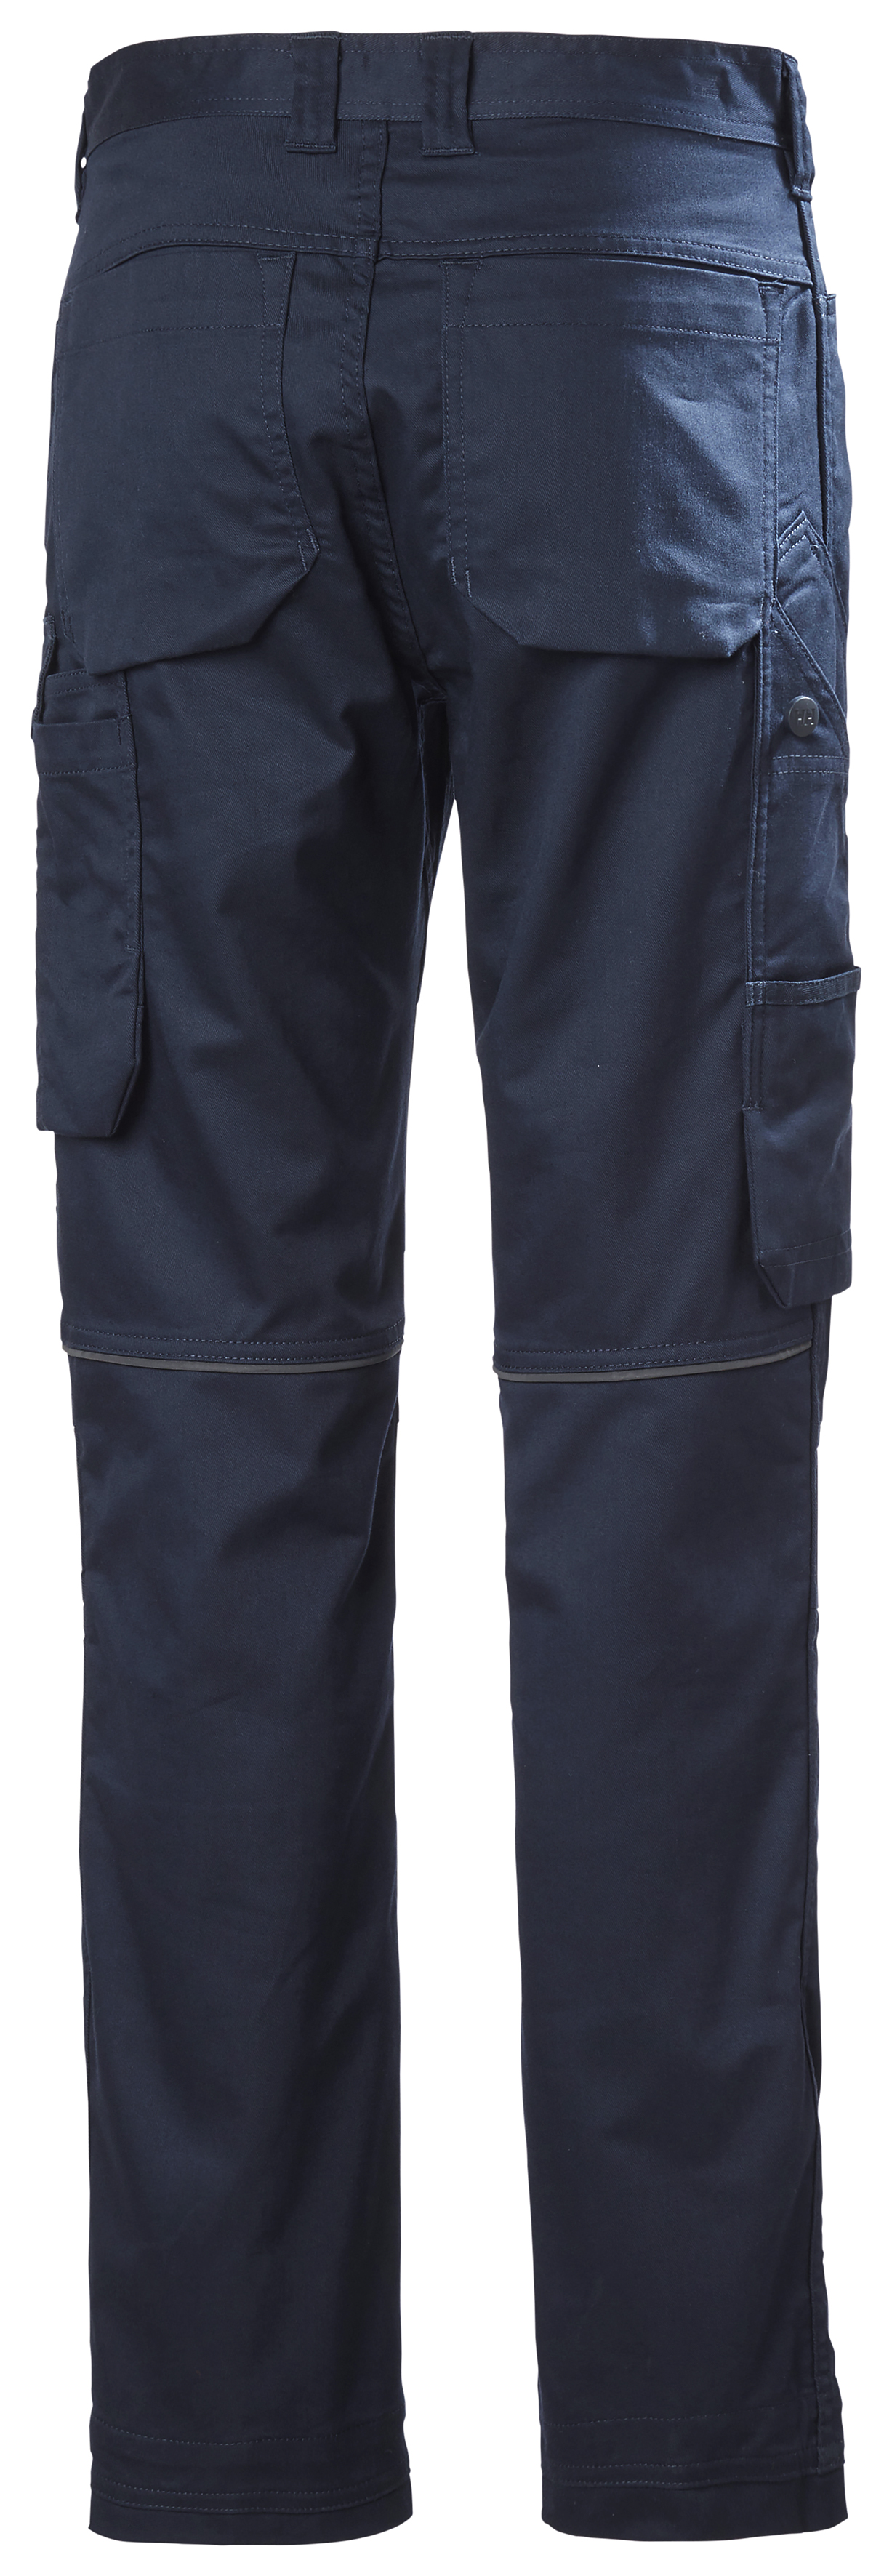 W MANCHESTER WORK PANT